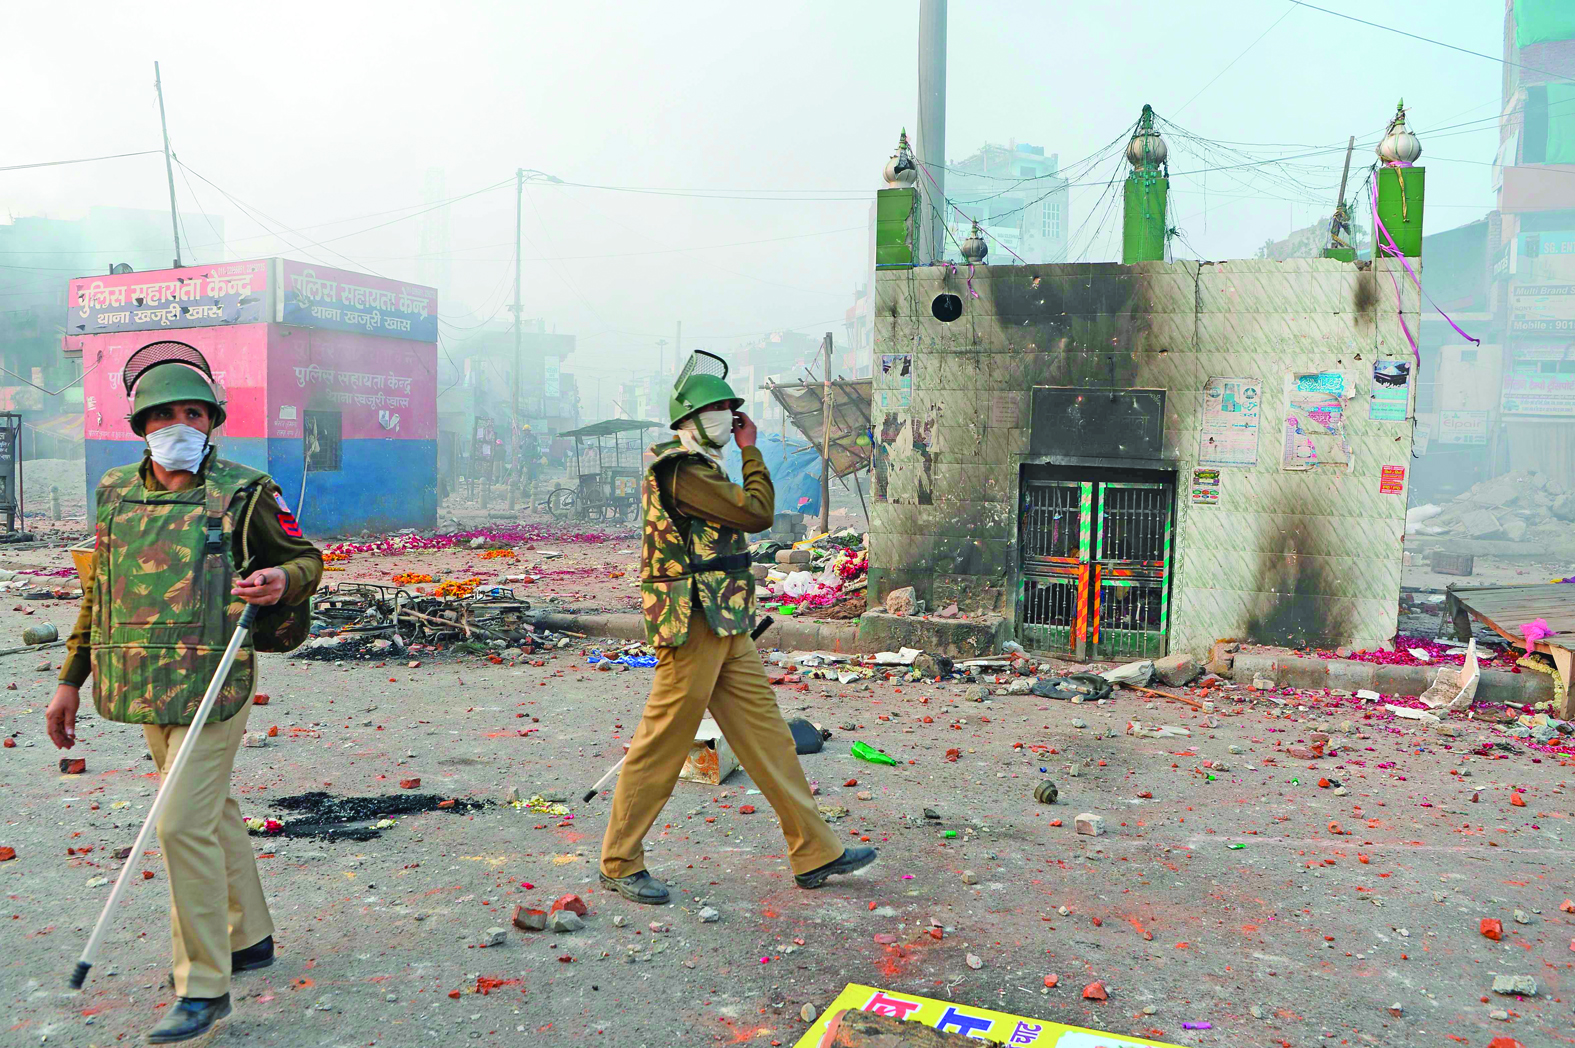 Policemen stand on a vandalised road following clashes between supporters and opponents of a new citizenship law, at Bhajanpura area of New Delhi on February 24, 2020, ahead of US President arrival in New Delhi. - Fresh clashes raged in New Delhi in protests over a contentious citizenship law on February 24, hours ahead of a visit to the Indian capital by US President Donald Trump. India has seen weeks of demonstrations and violence since a new citizenship law -- that critics say discriminates against Muslims -- came into force in December. (Photo by Sajjad HUSSAIN / AFP)